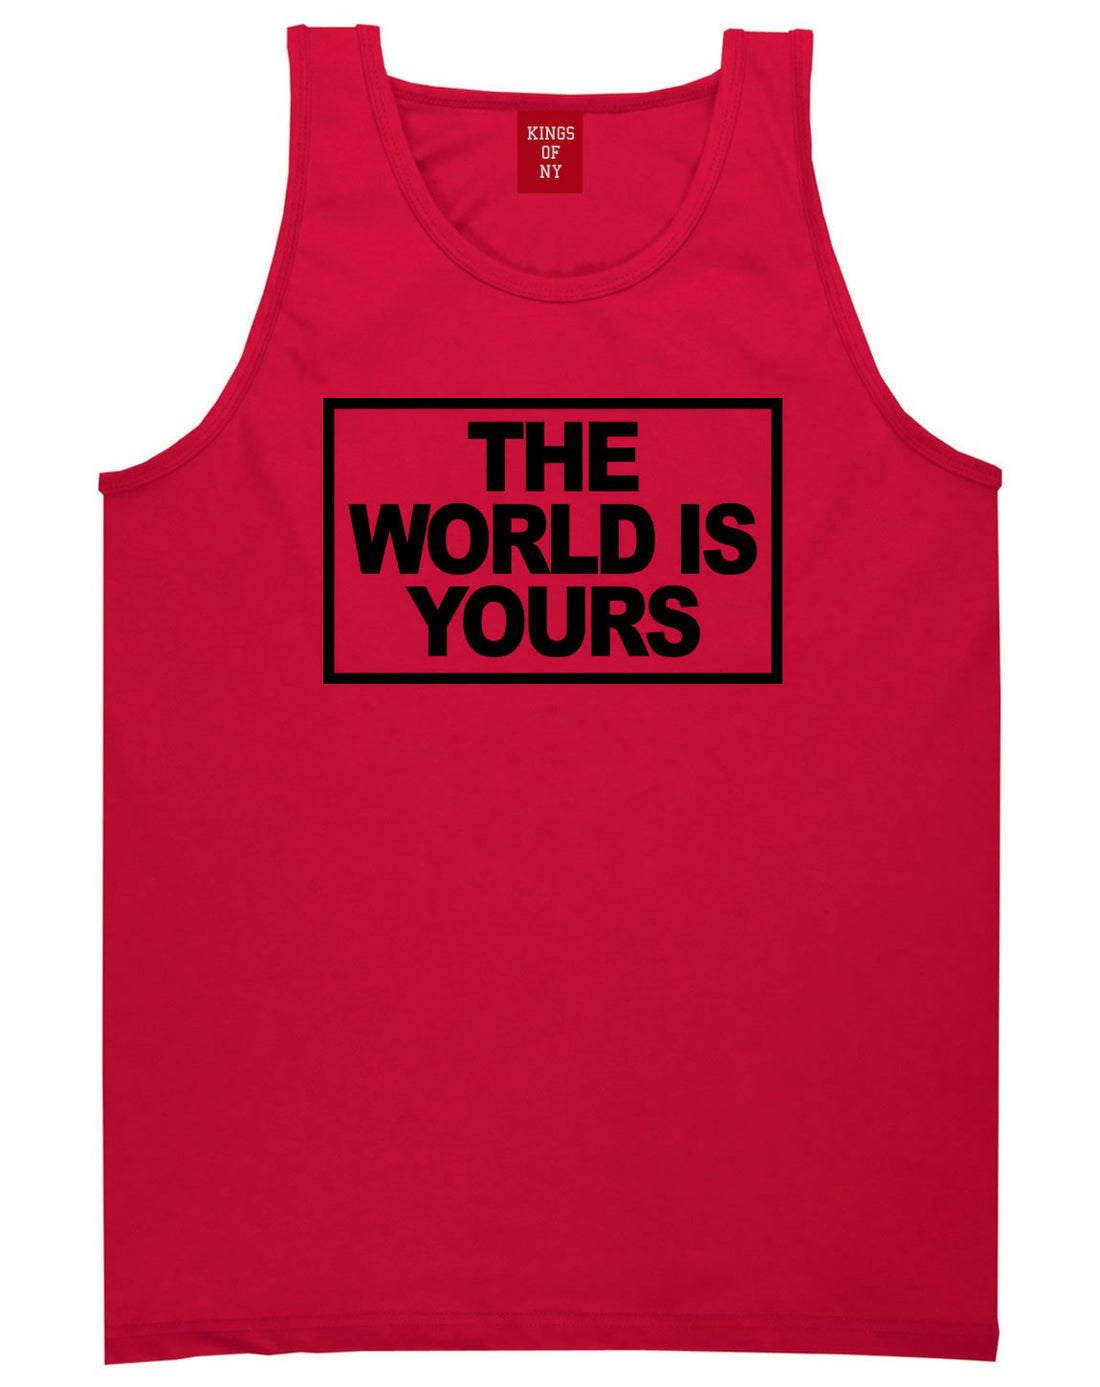 The World Is Yours Tank Top in Red By Kings Of NY